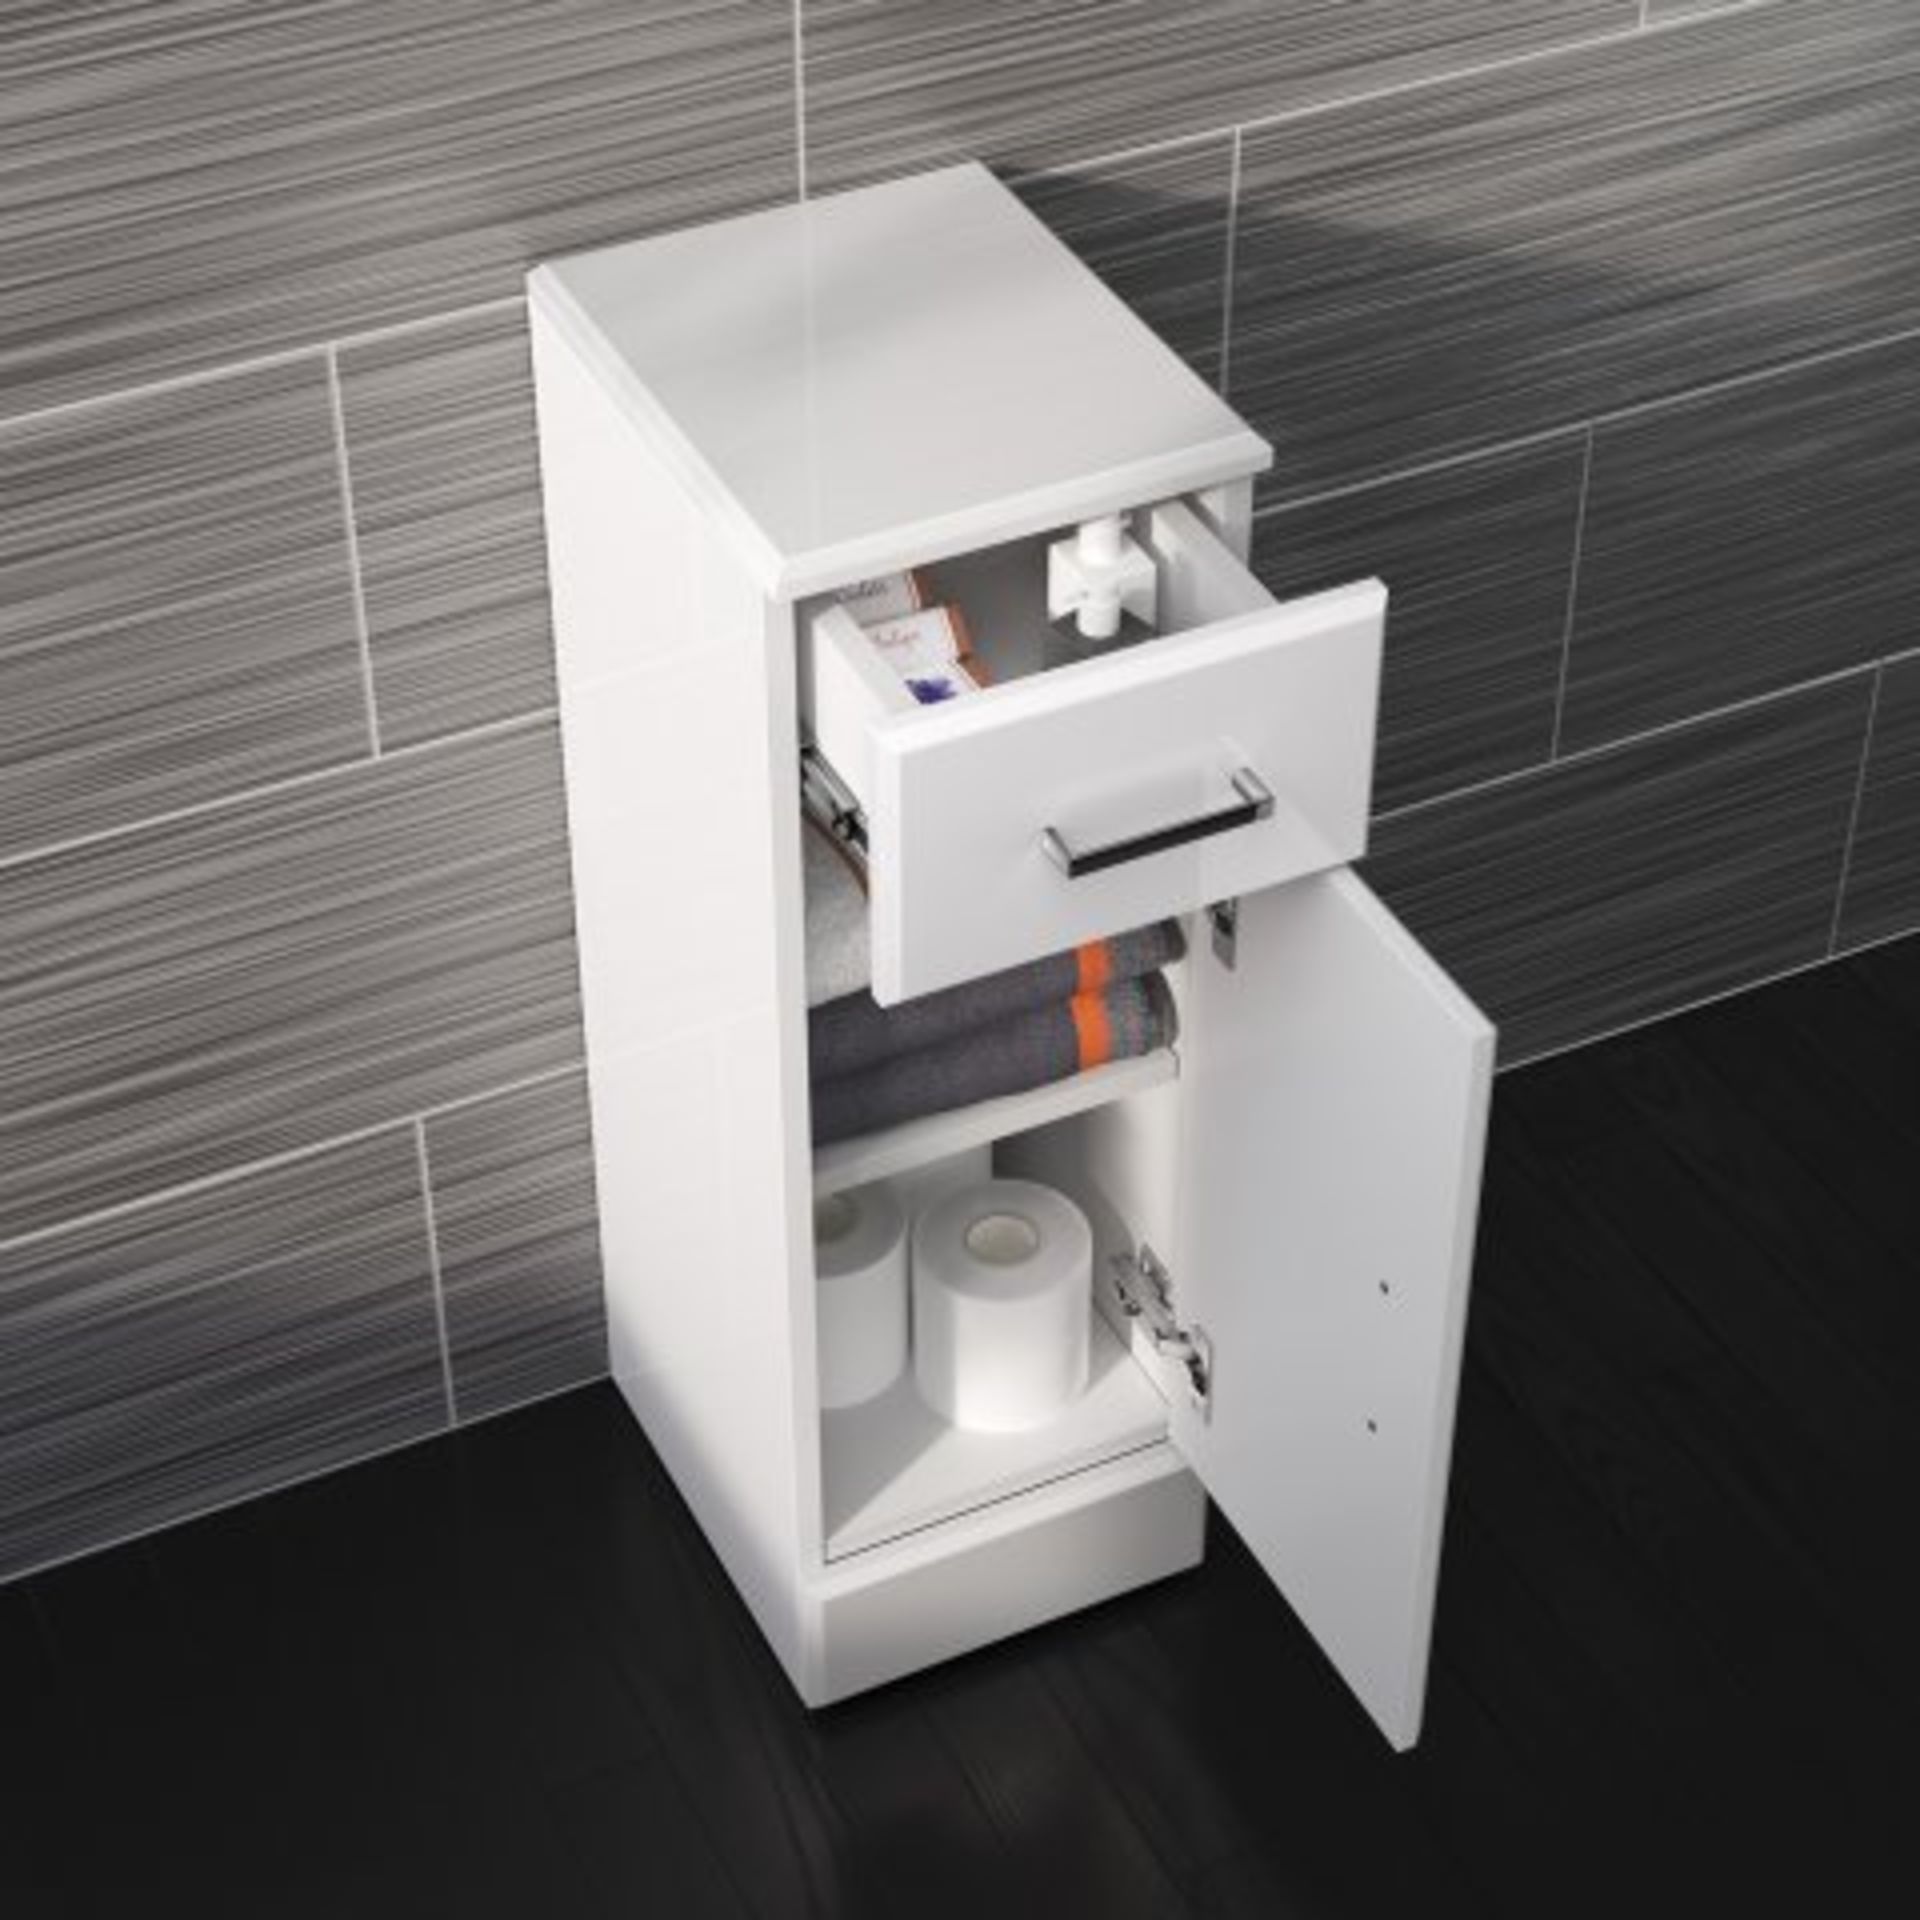 (P203) 250x300mm Quartz Gloss White Small Side Cabinet Unit. RRP £143.99. This state-of-the-art